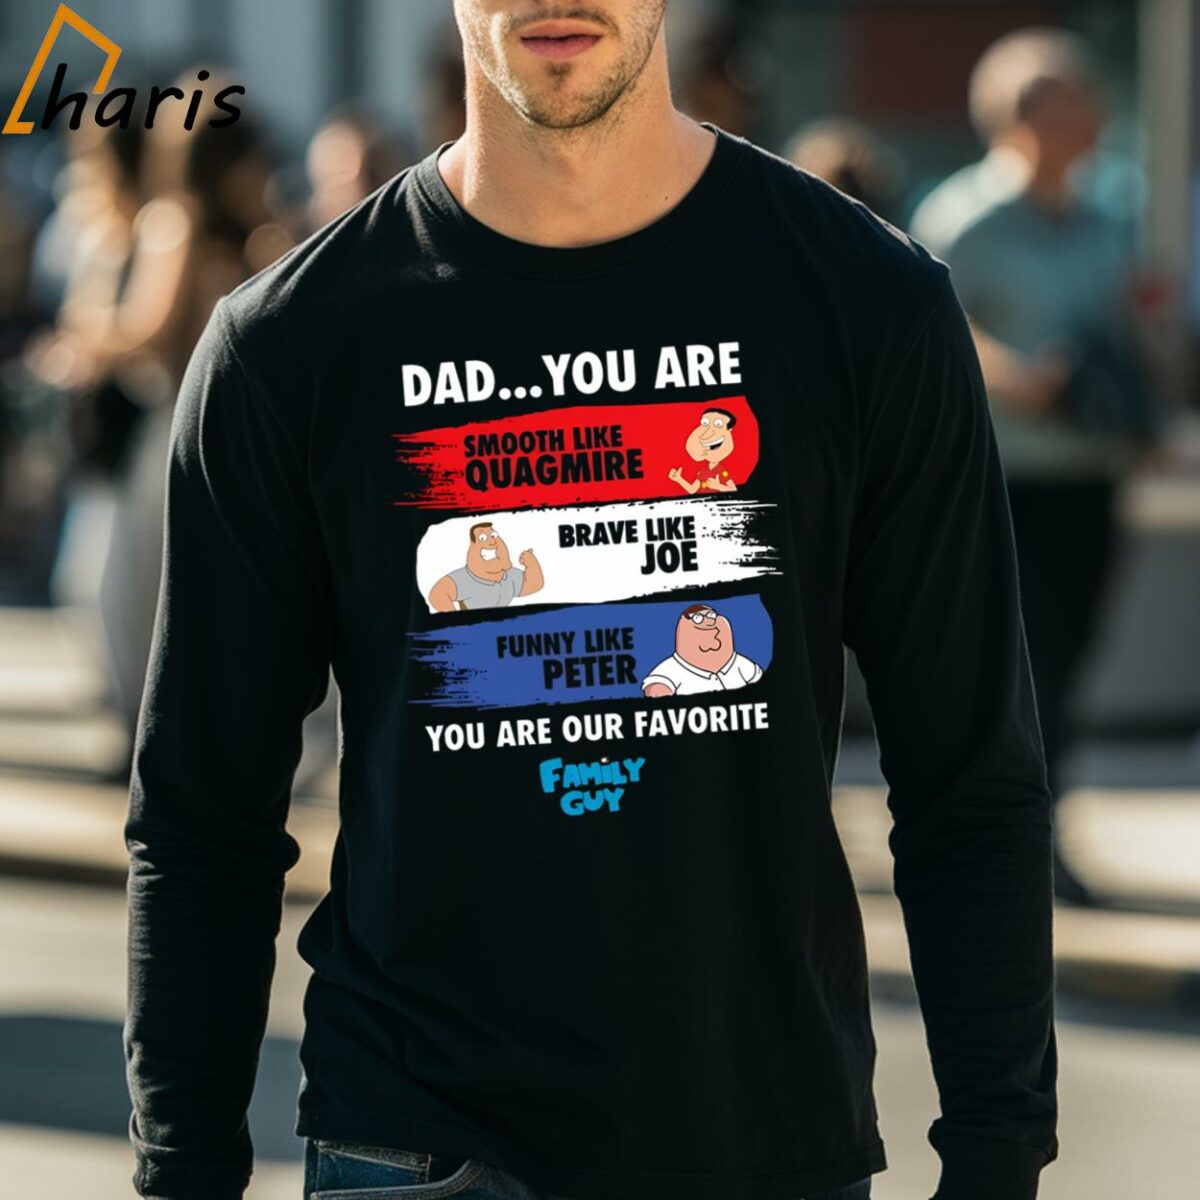 Dad You Are Smooth Like Quagmire Brave Like Joe Funny Like Peter You Are Our Favorite Family Guy Shirt 4 long sleeve shirt